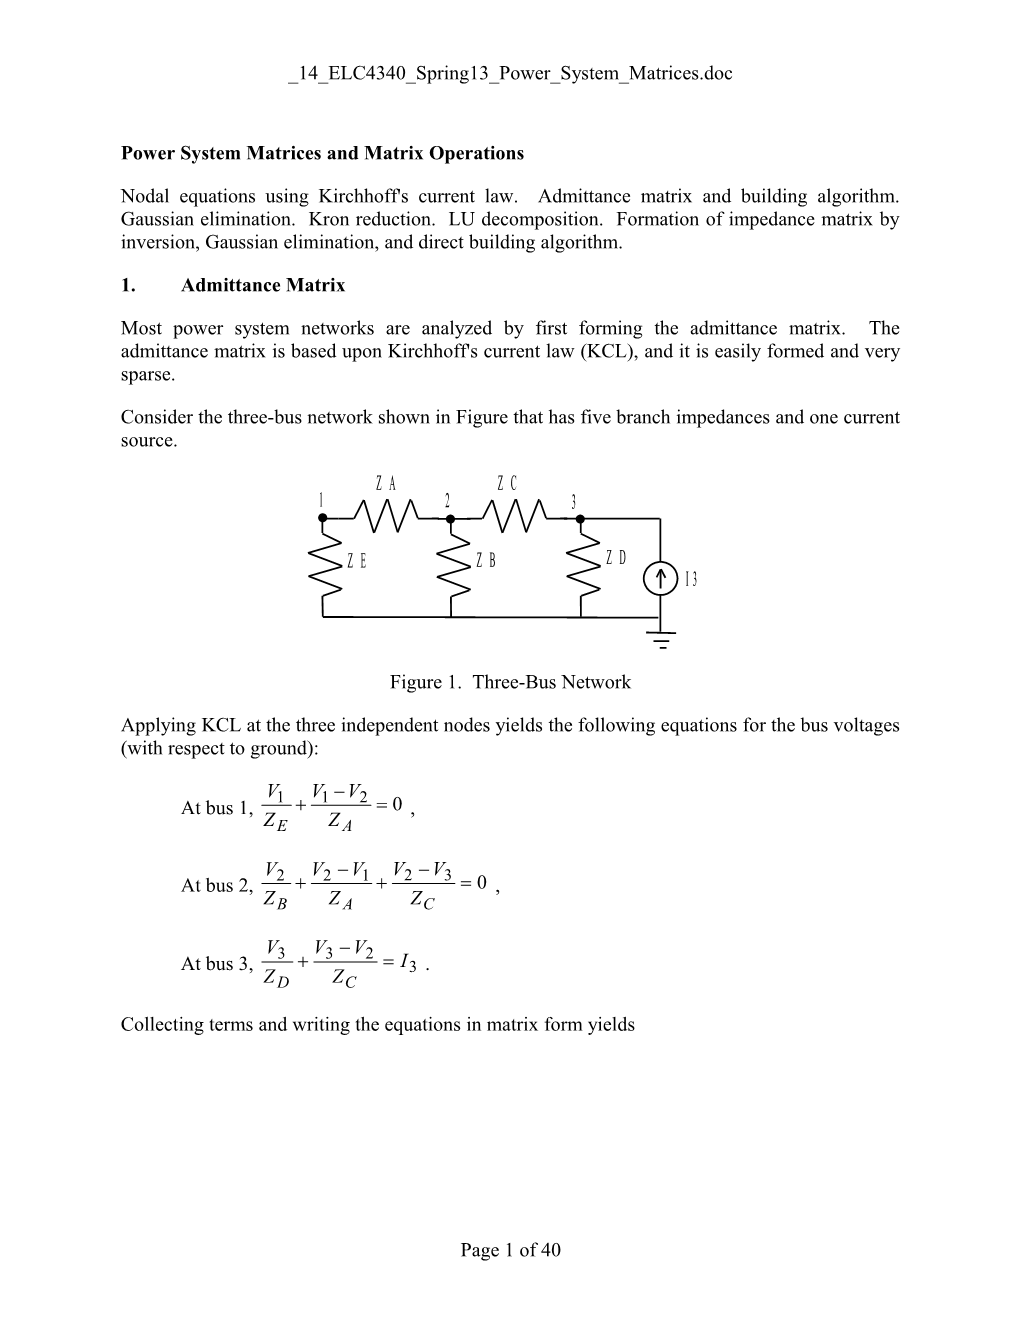 Power System Matrices and Matrix Operations